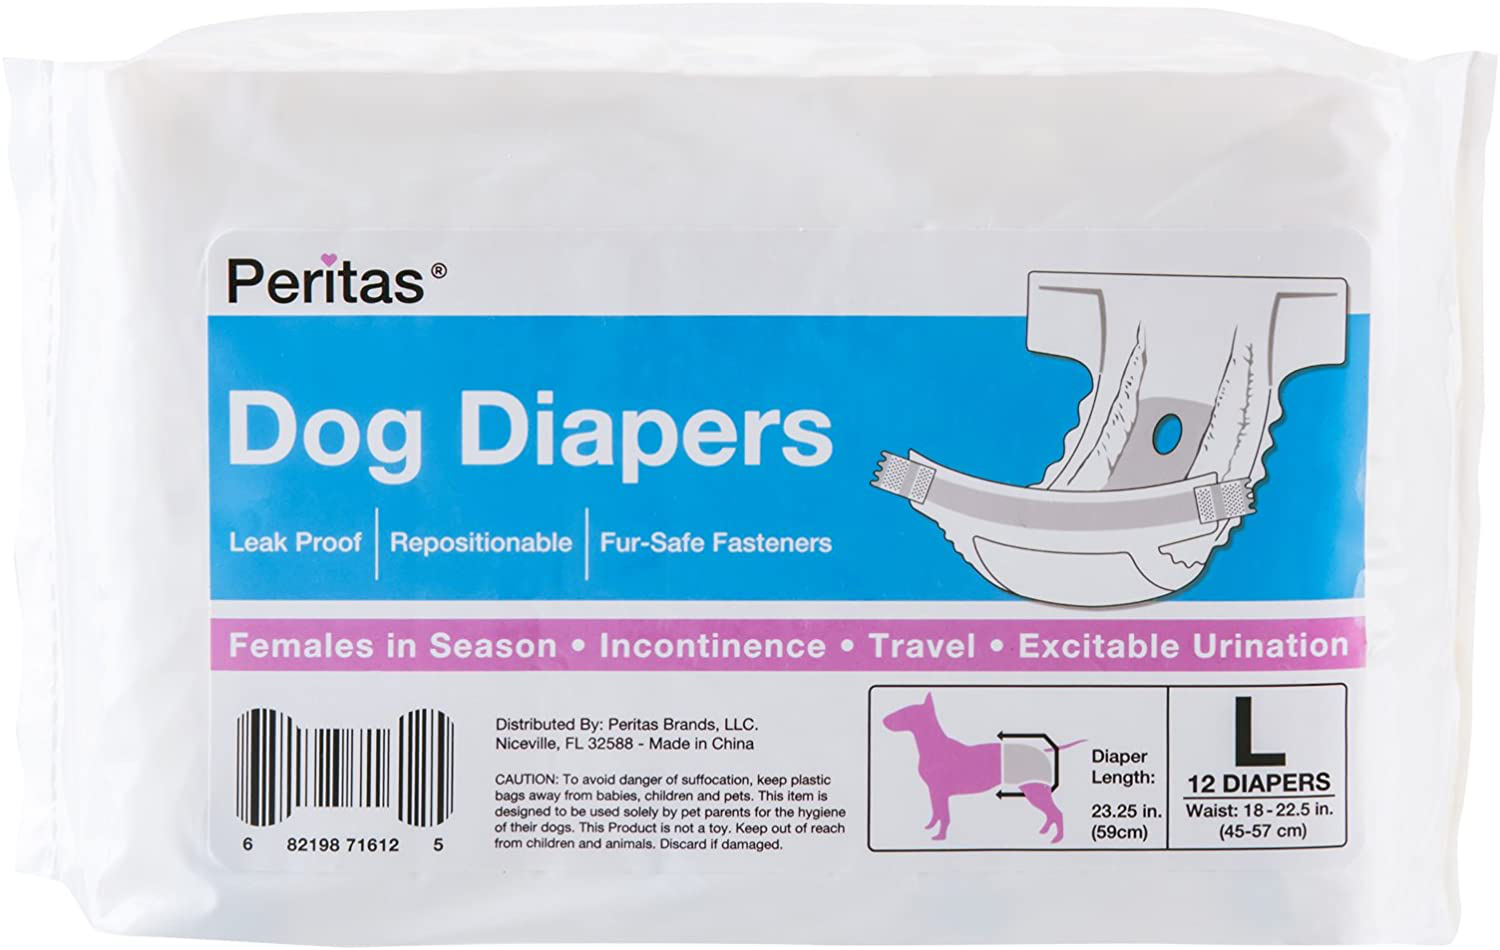 Peritas Disposable Large/Xlarge Dog Diapers | Female Dog Diapers |Puppy Diapers, Diapers for Dogs in Heat, or Dog Incontinence Diapers